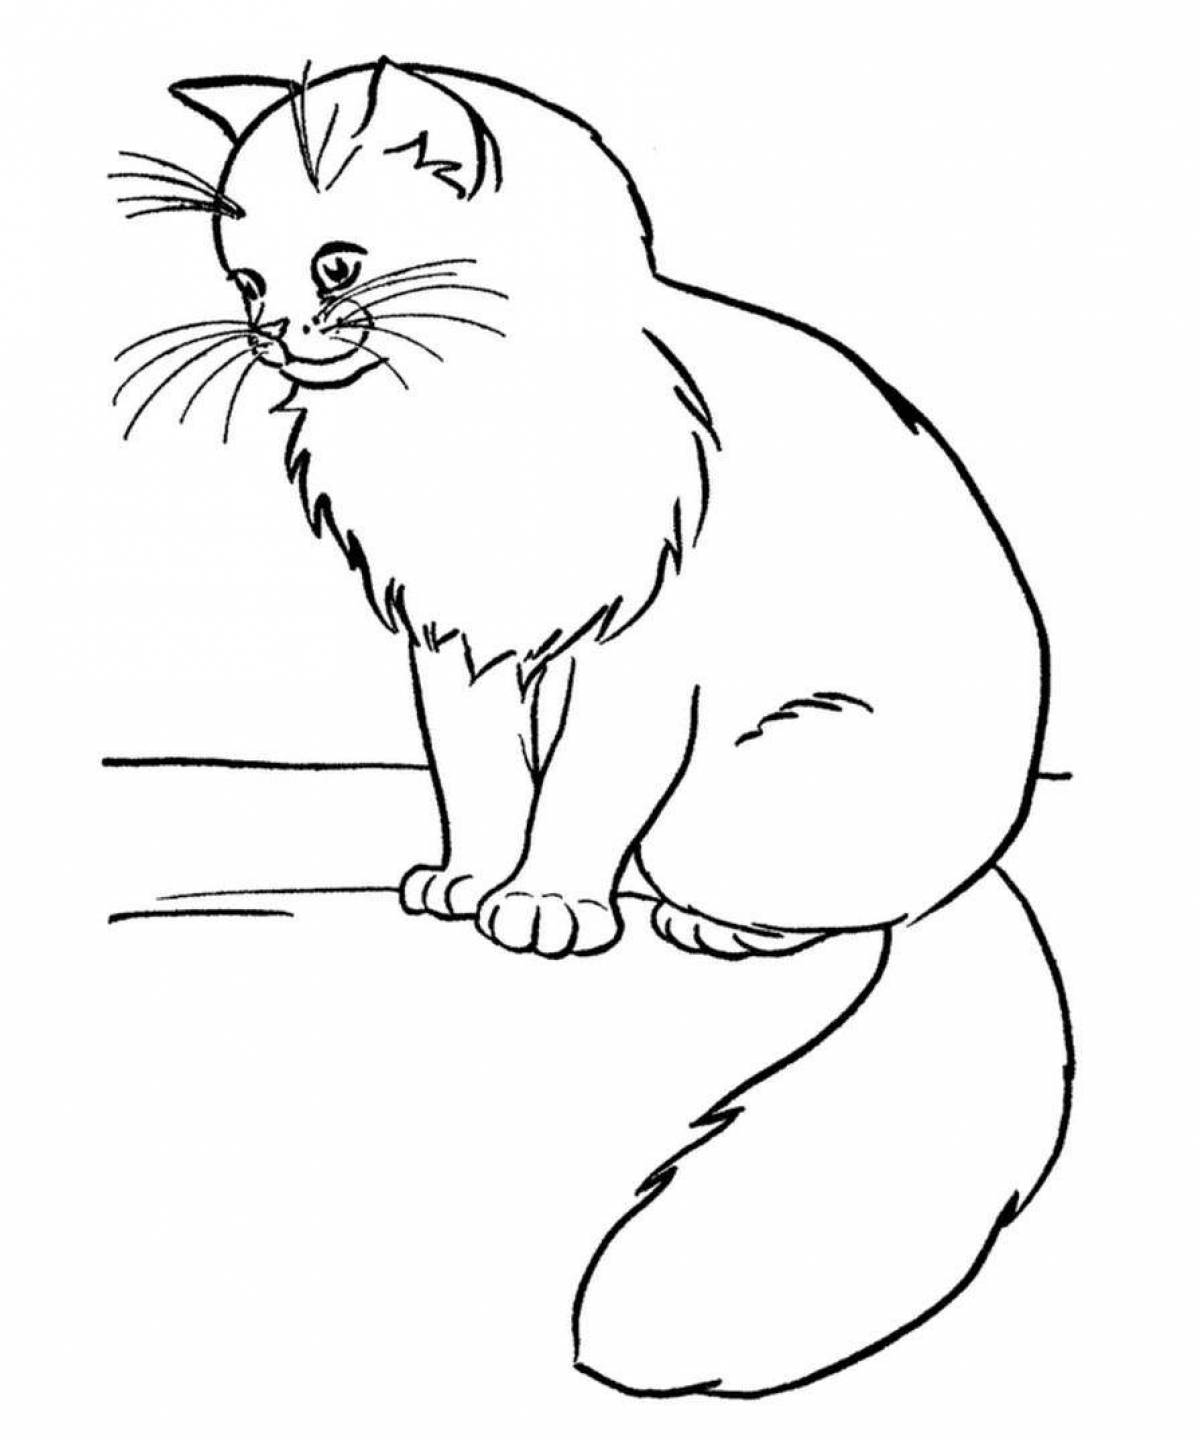 Coloring book of a frolicking cat